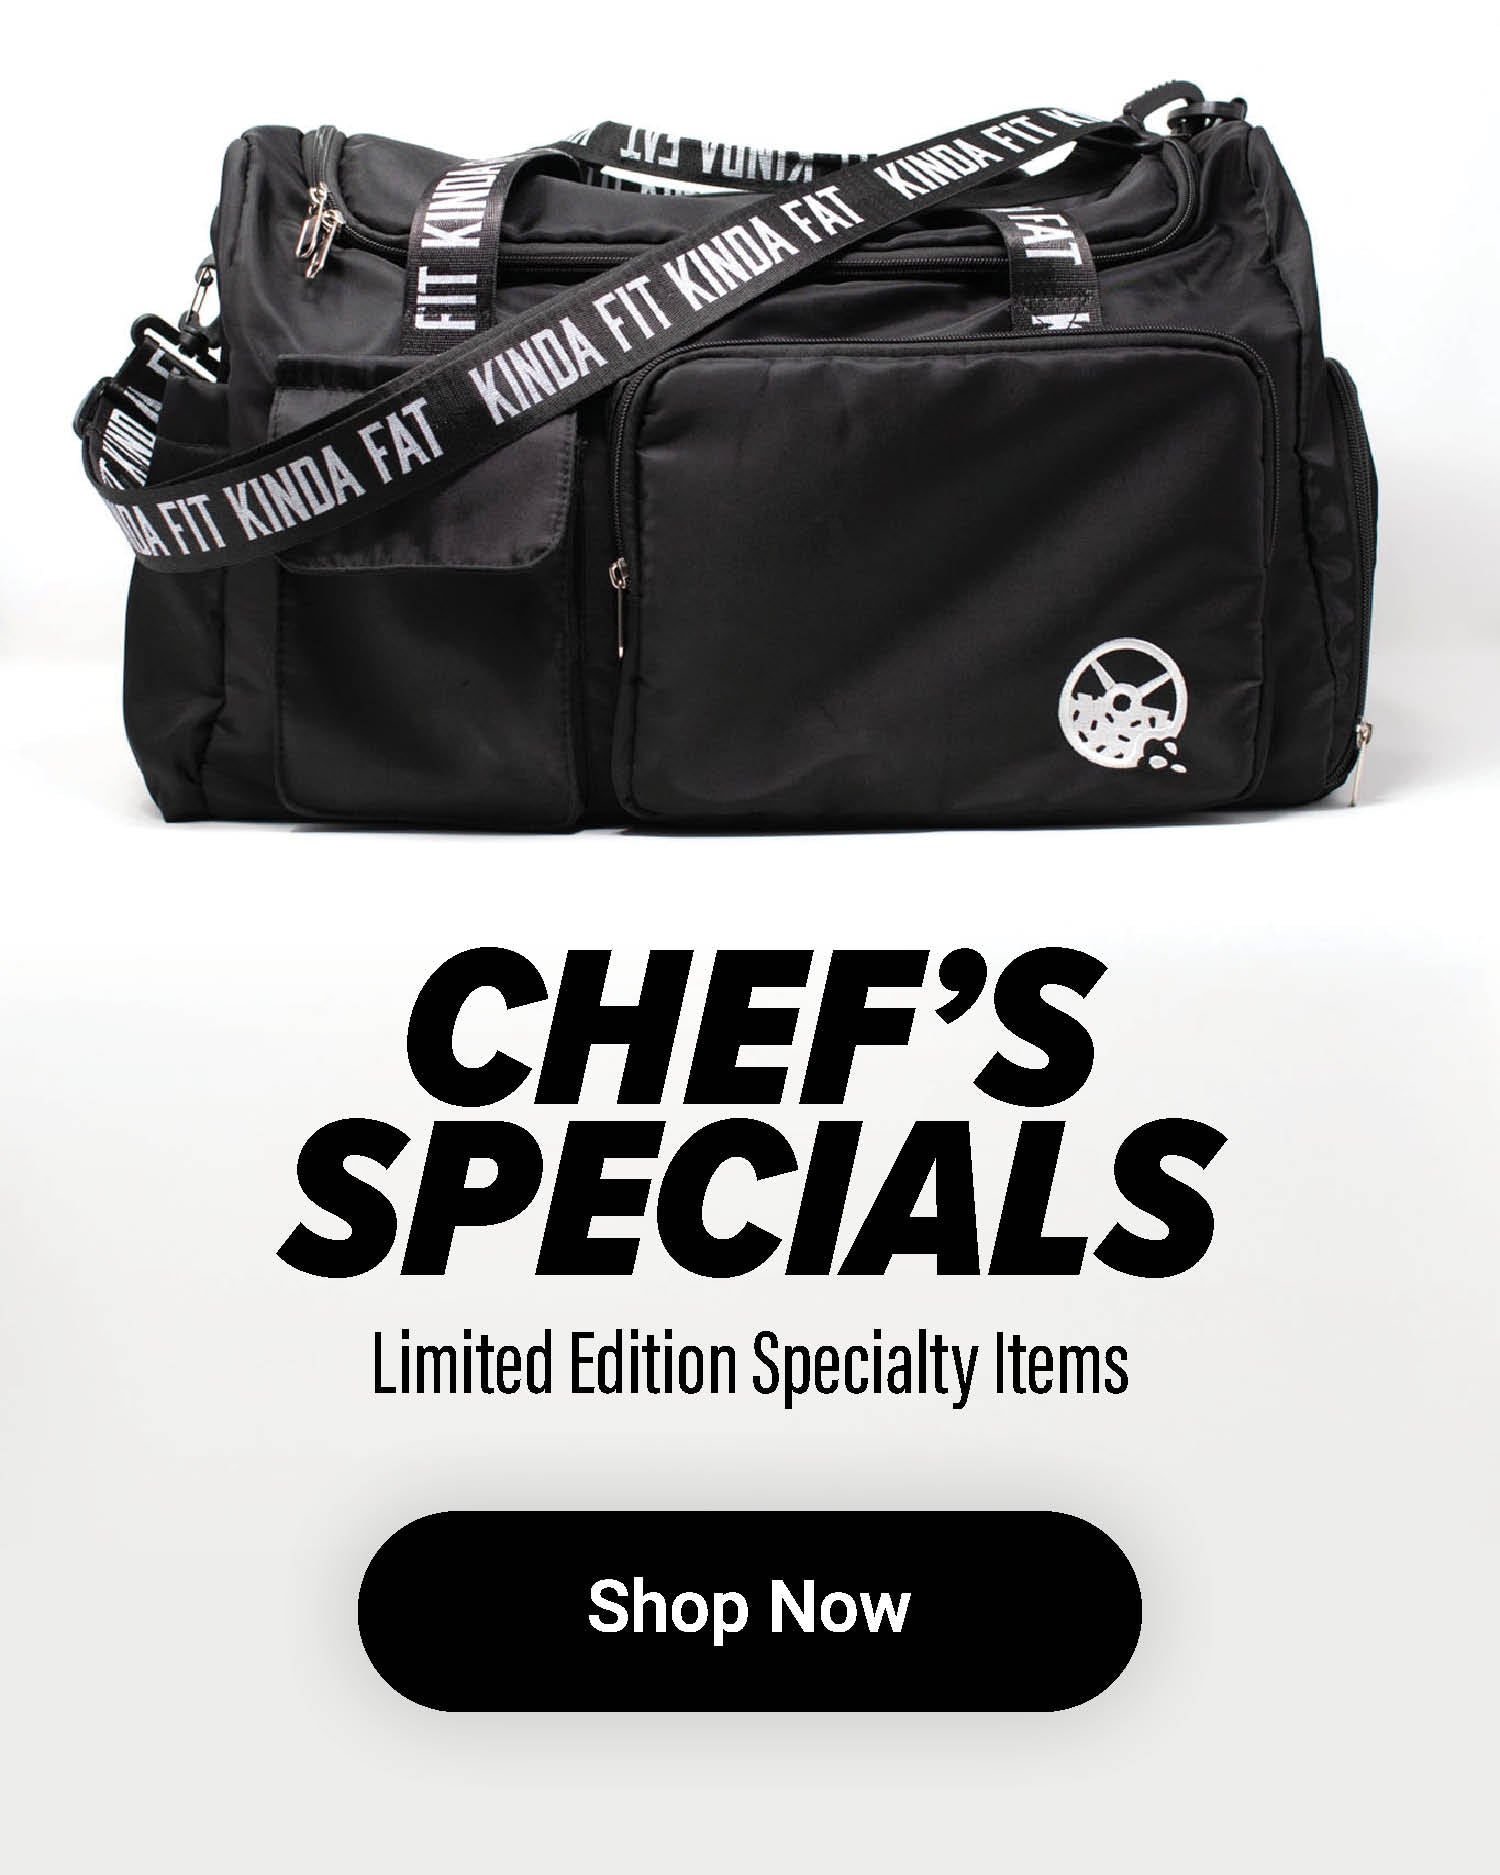 chef specials available in a duffle bag, track jacket, dog hoodie, coach's jacket, seaweed inspired designs, and anorak - shop now